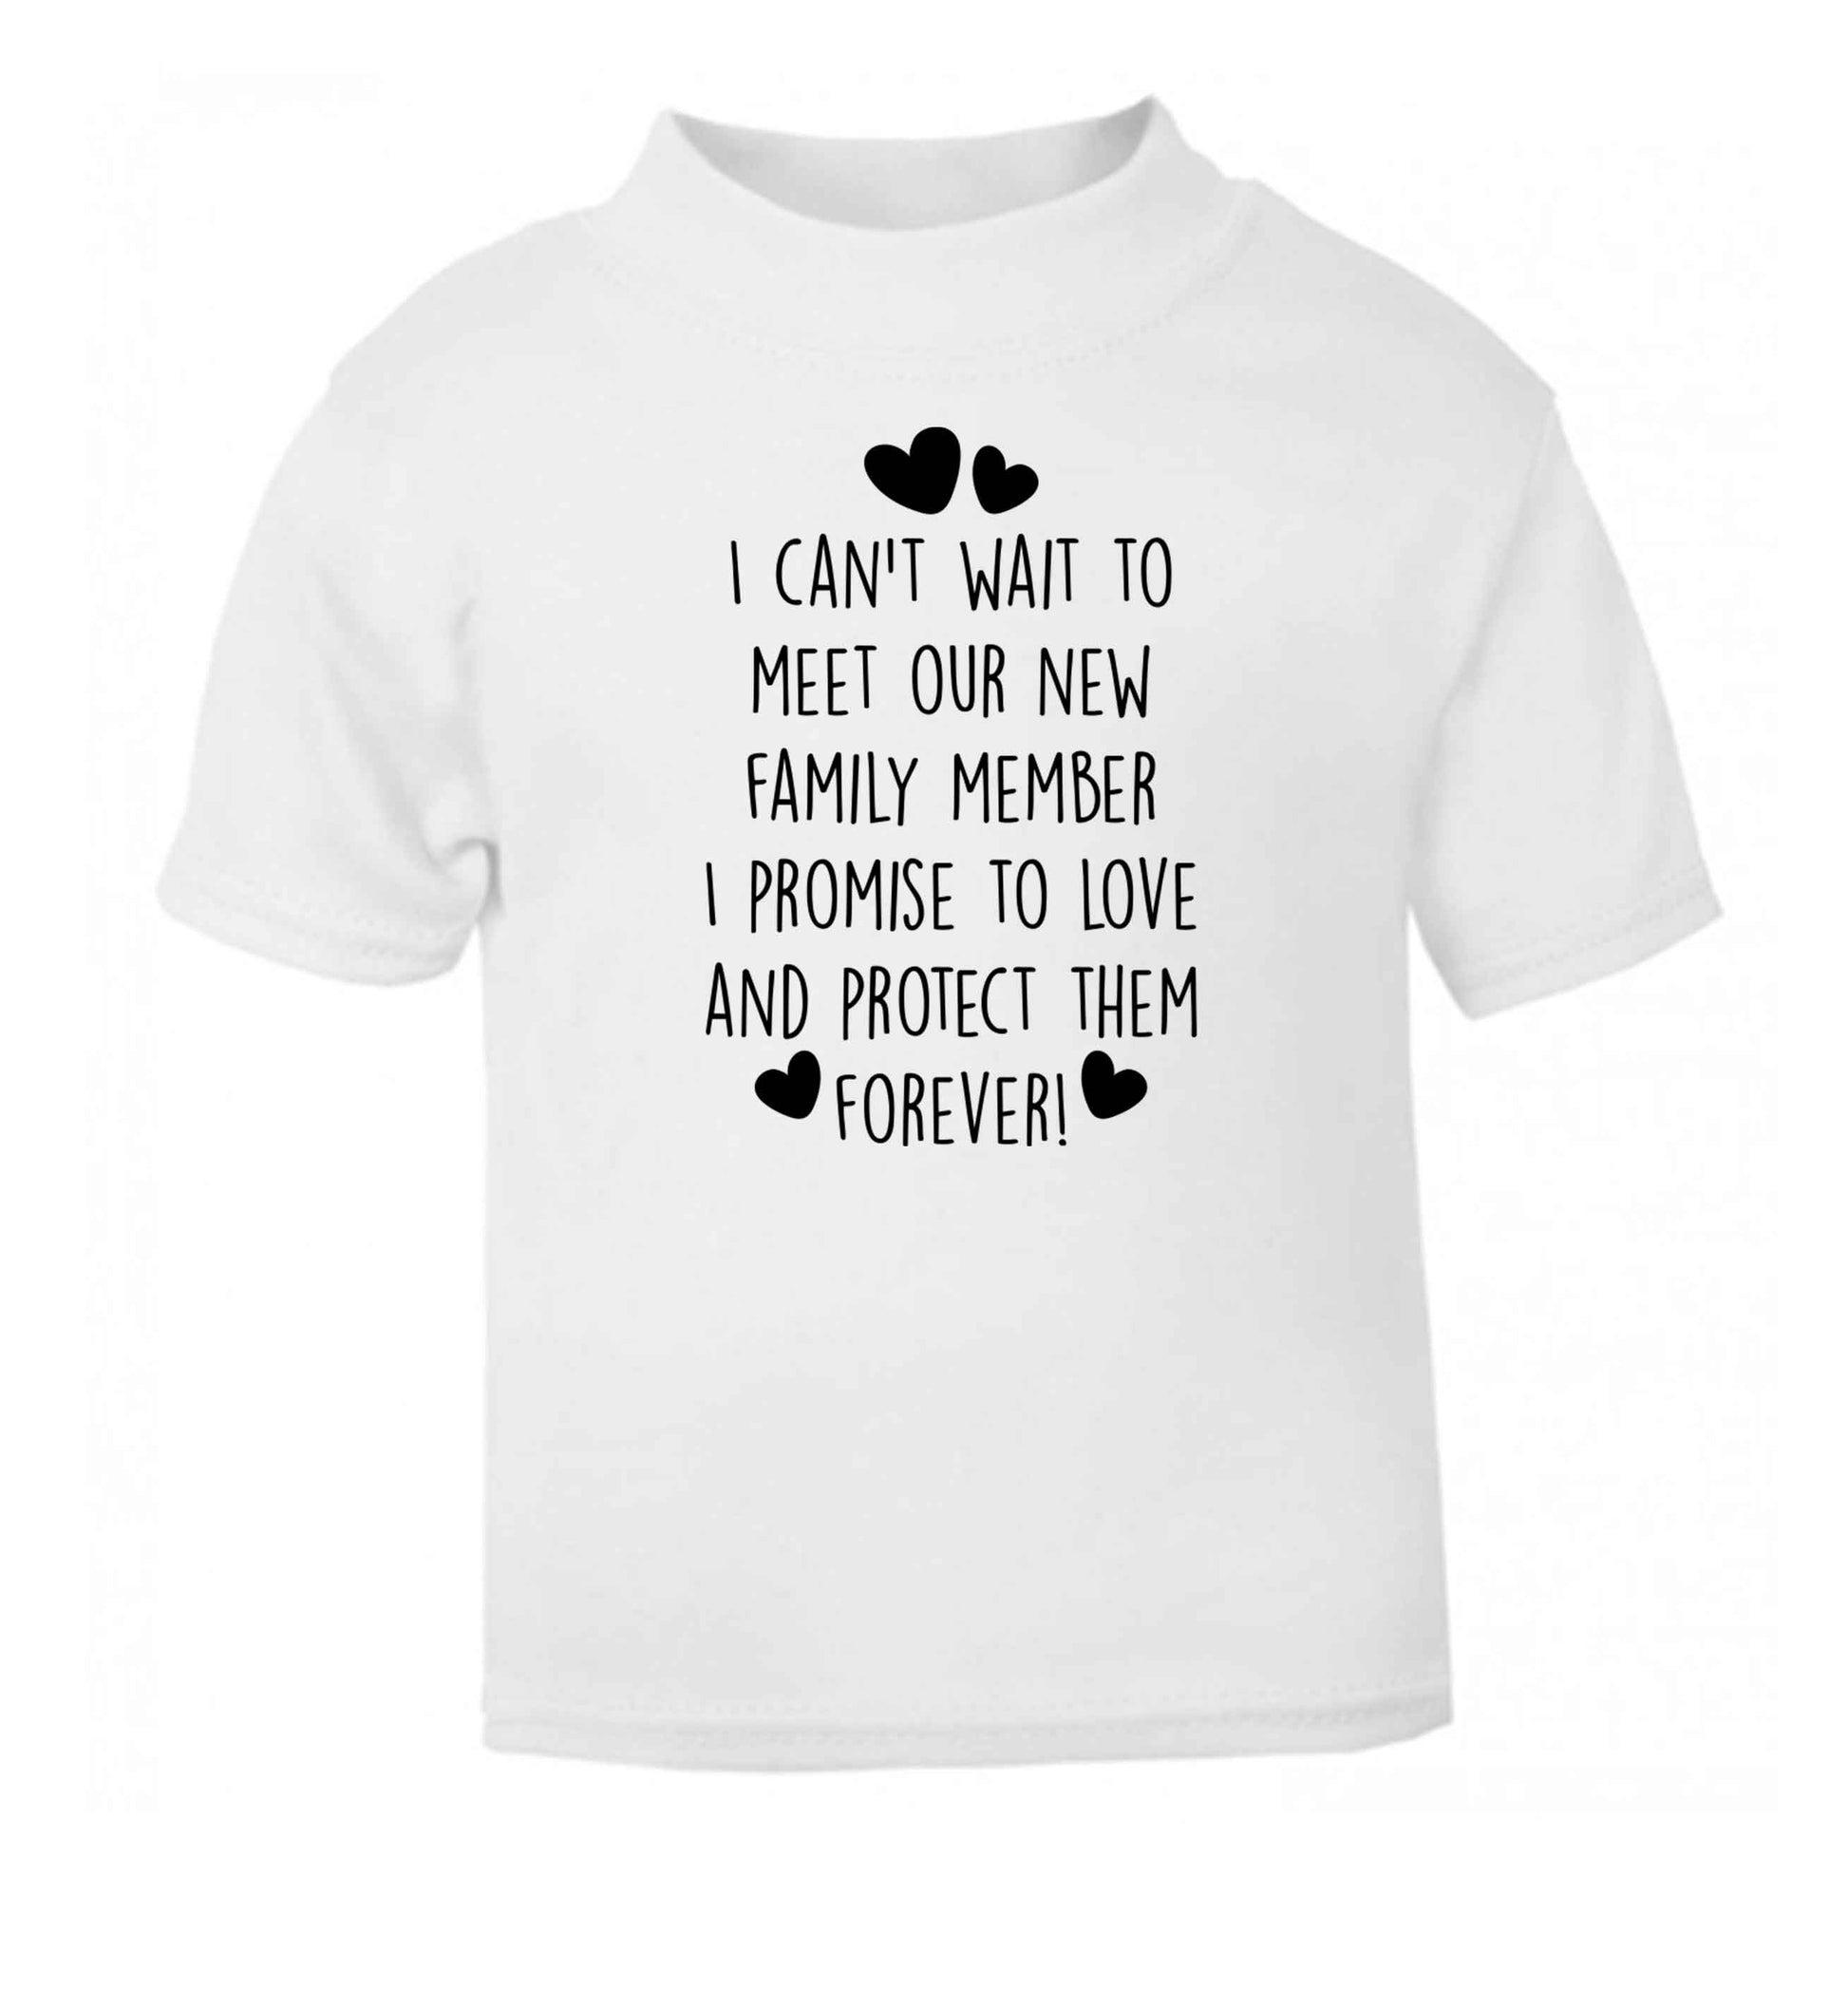 I can't wait to meet our new family member I promise to love and protect them foreverwhite Baby Toddler Tshirt 2 Years